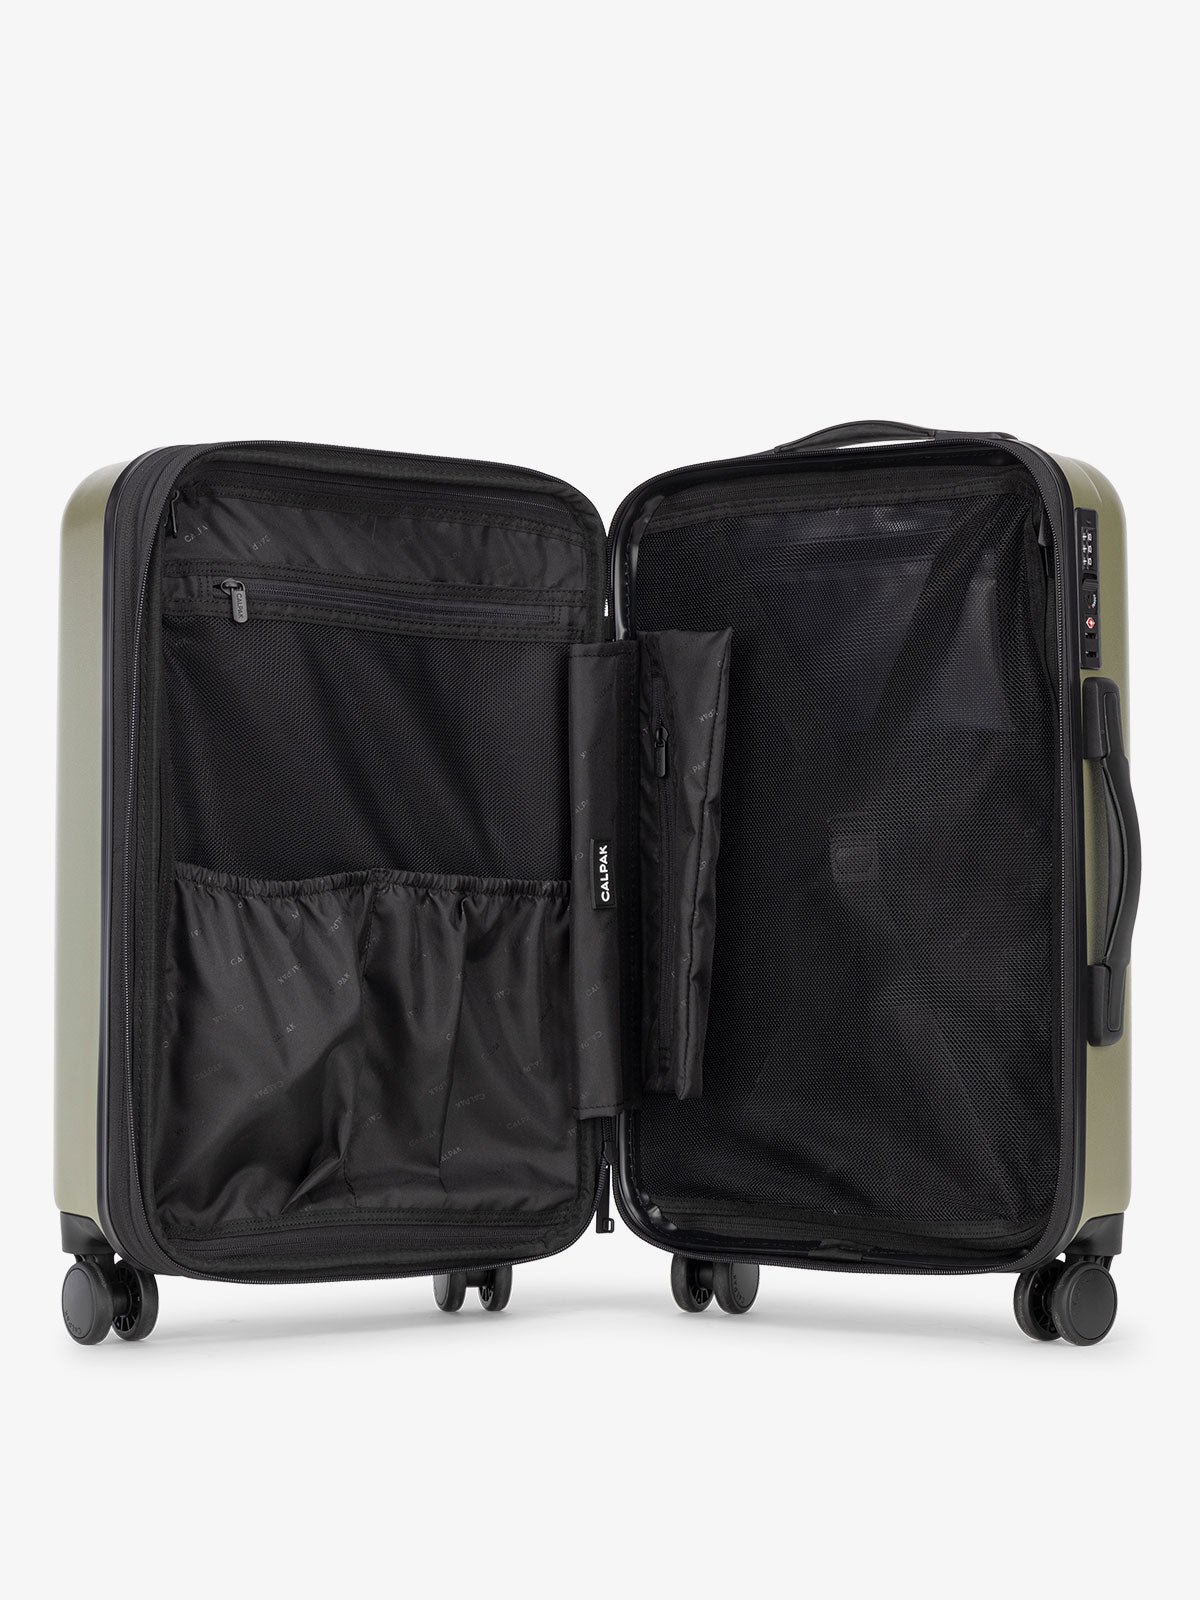 Green pistachio CALPAK Evry Large Luggage features divided compartments with interior pockets for organized packing